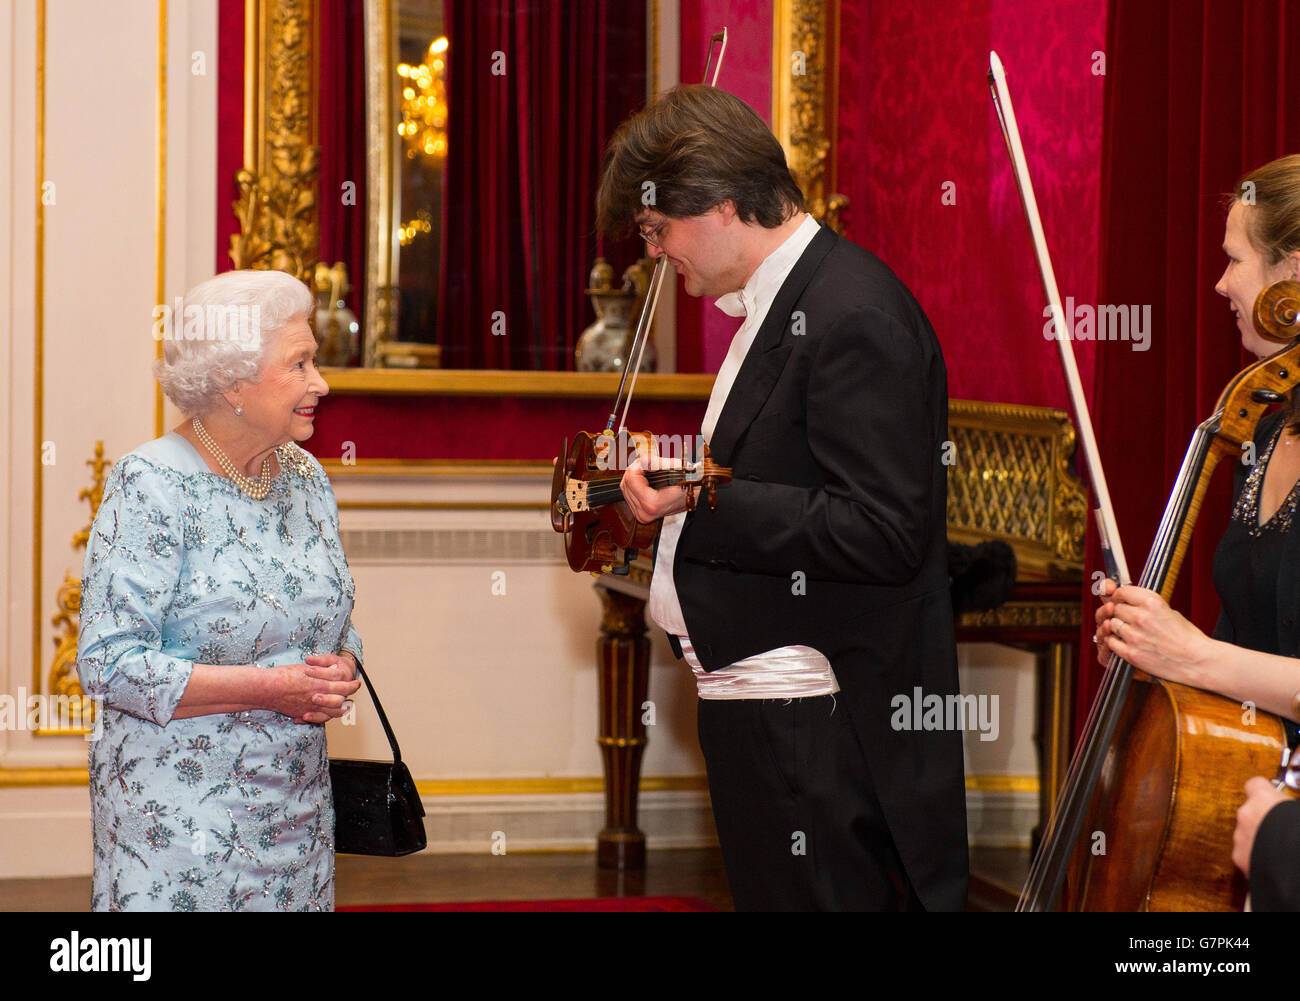 Queen Elizabeth II meets London Symphony Orchestra (LSO) violinist Roman Simovic, during a reception at Buckingham Palace, London, to mark the conclusion of the 'Moving Music' campaign and the long association of Michael Tilson Thomas with the LSO. Stock Photo